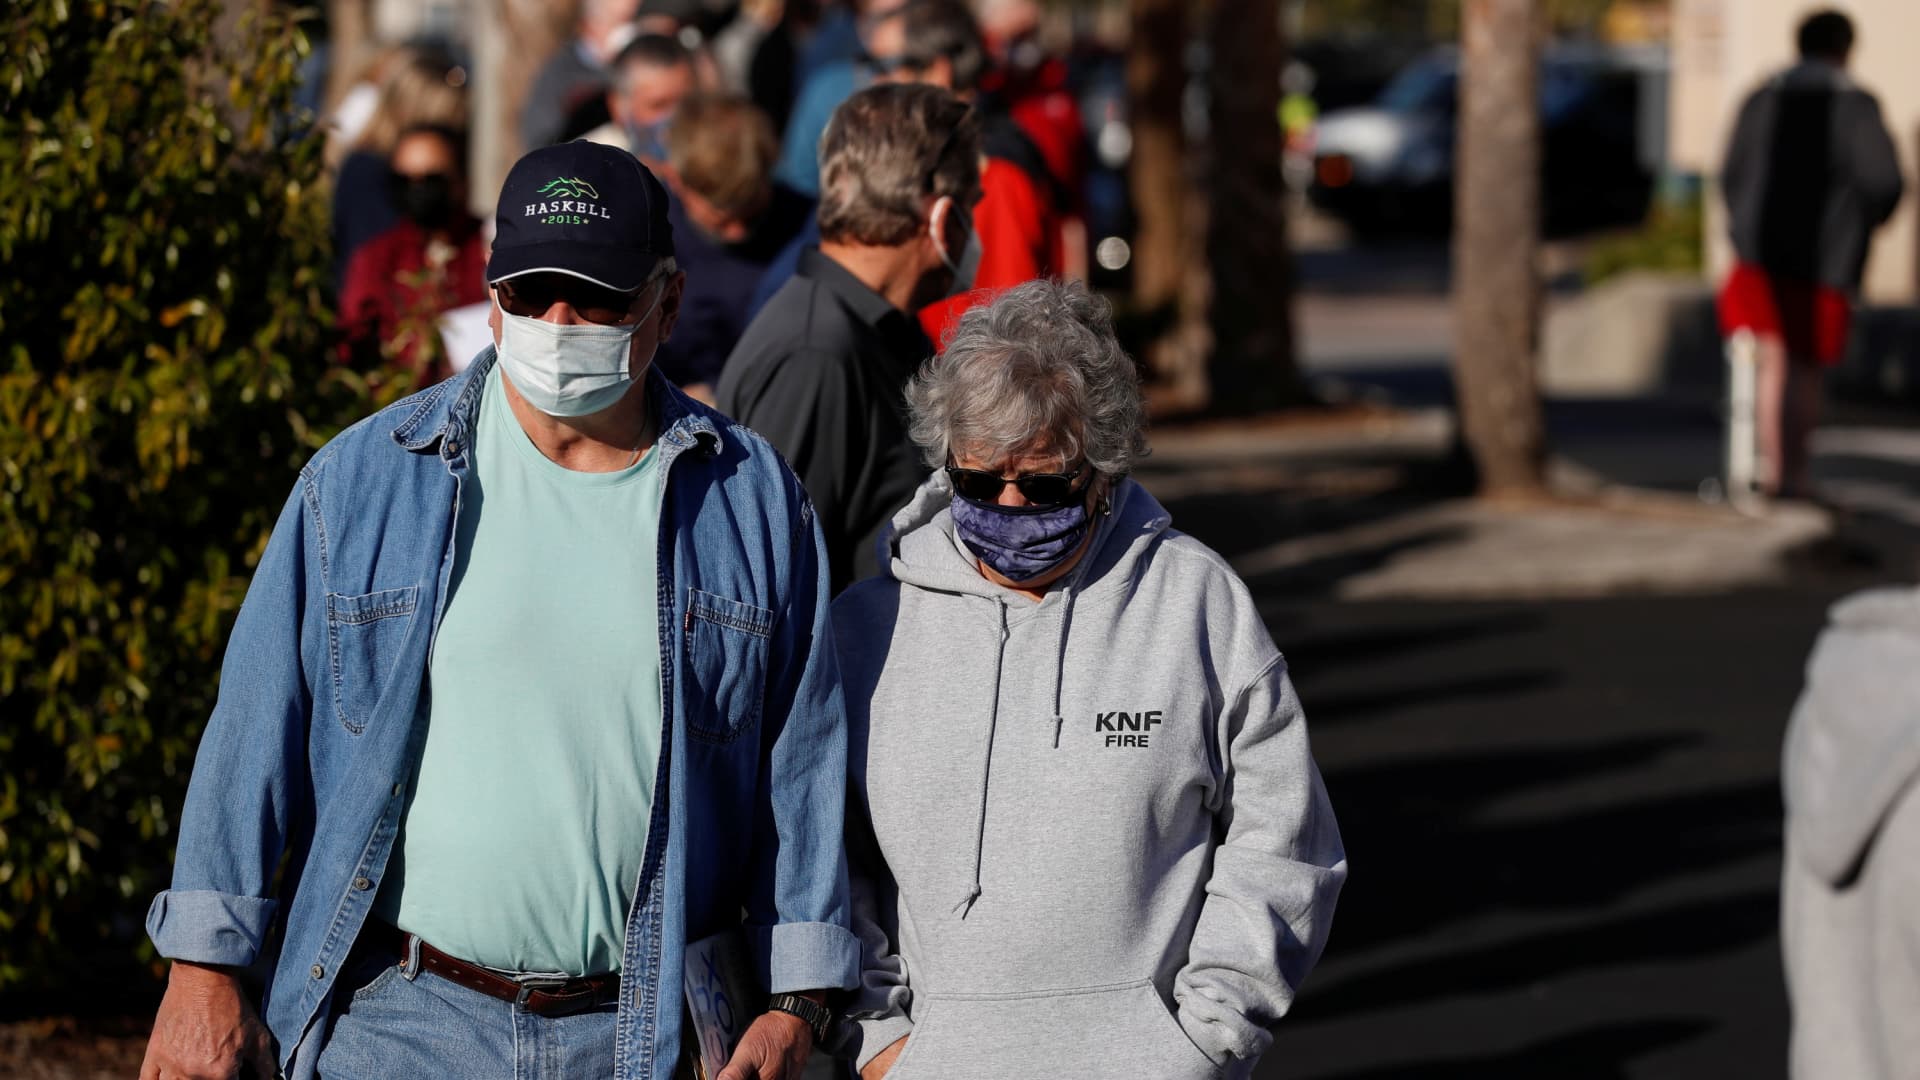 Seniors, who are 65 and over, wait in line at the Department of Health Sarasota COVID-19 vaccination clinic in Sarasota, Florida, U.S. January 4, 2021.